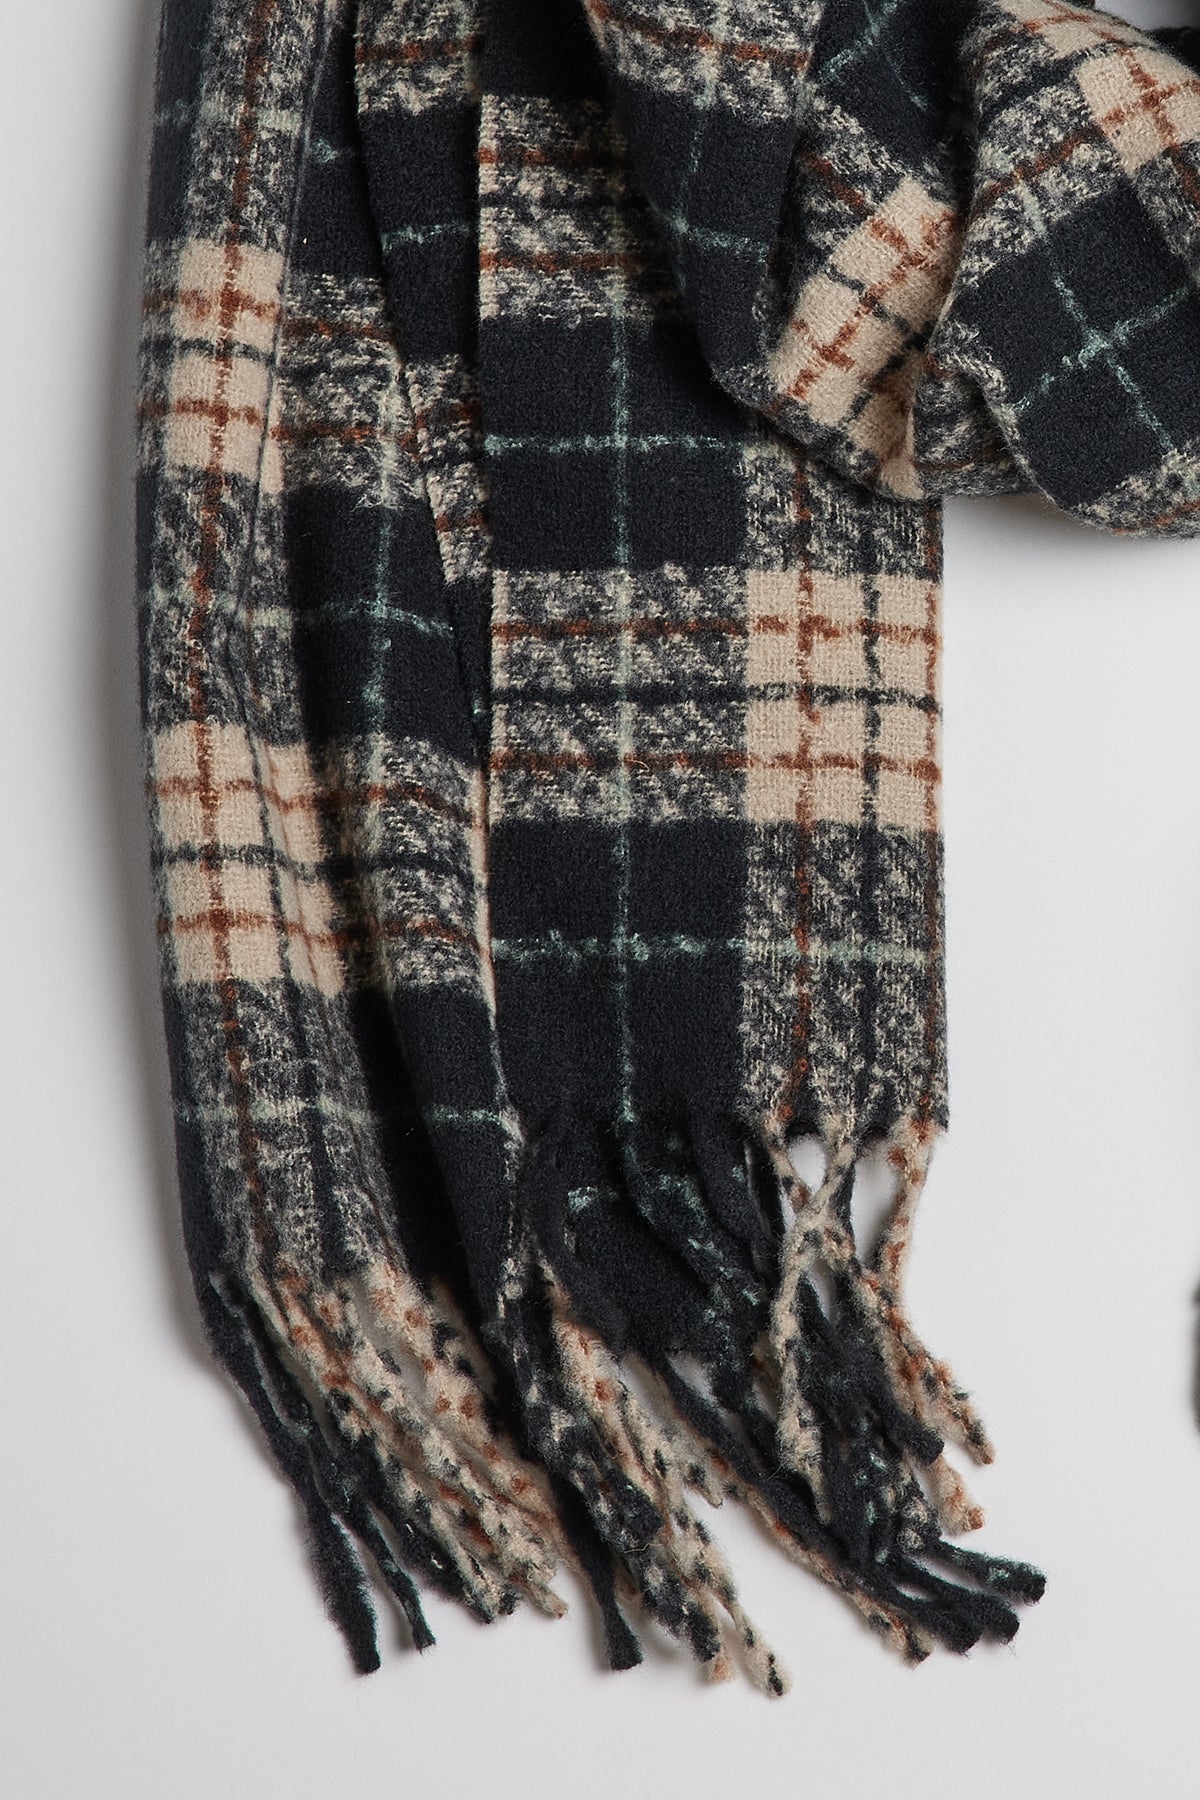 A PORTLAND PLAID SCARF by Velvet by Graham & Spencer with fringe ends, a classic accessory, on a white surface.-35211063296193